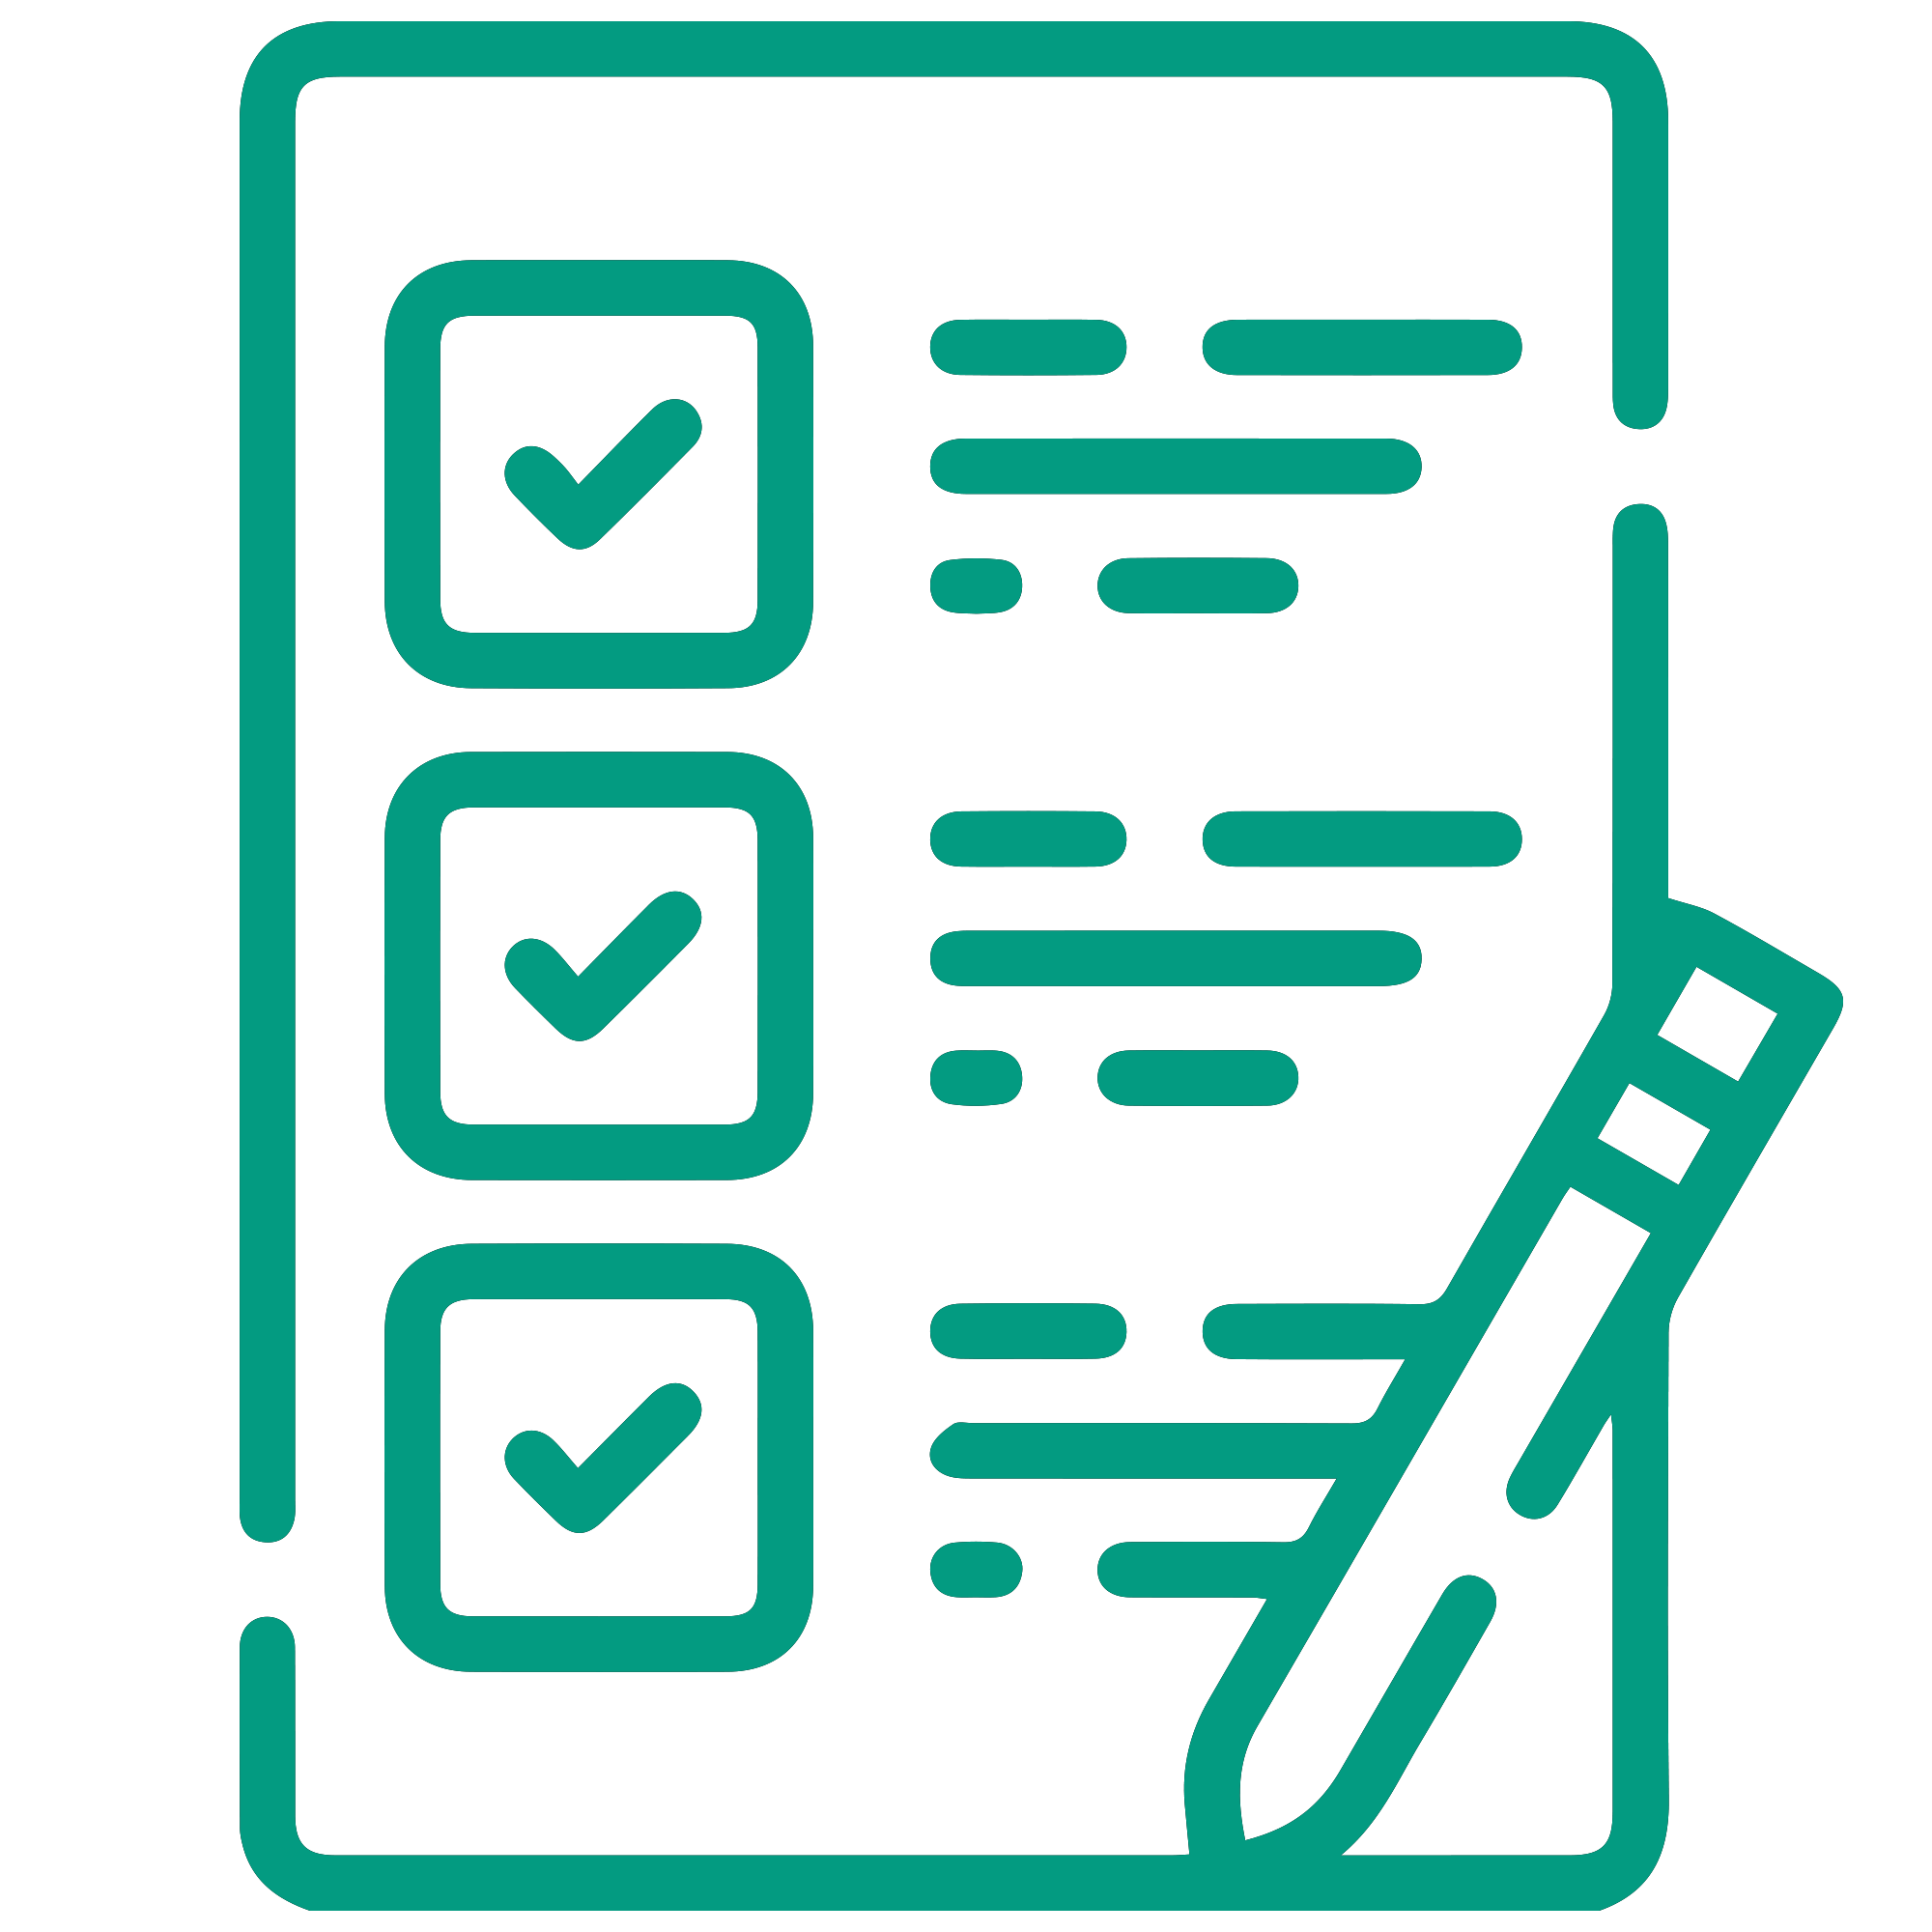 An image of a checklist template designed for a project, specifically focused on "Model Evaluation", aiding in systematic project planning.